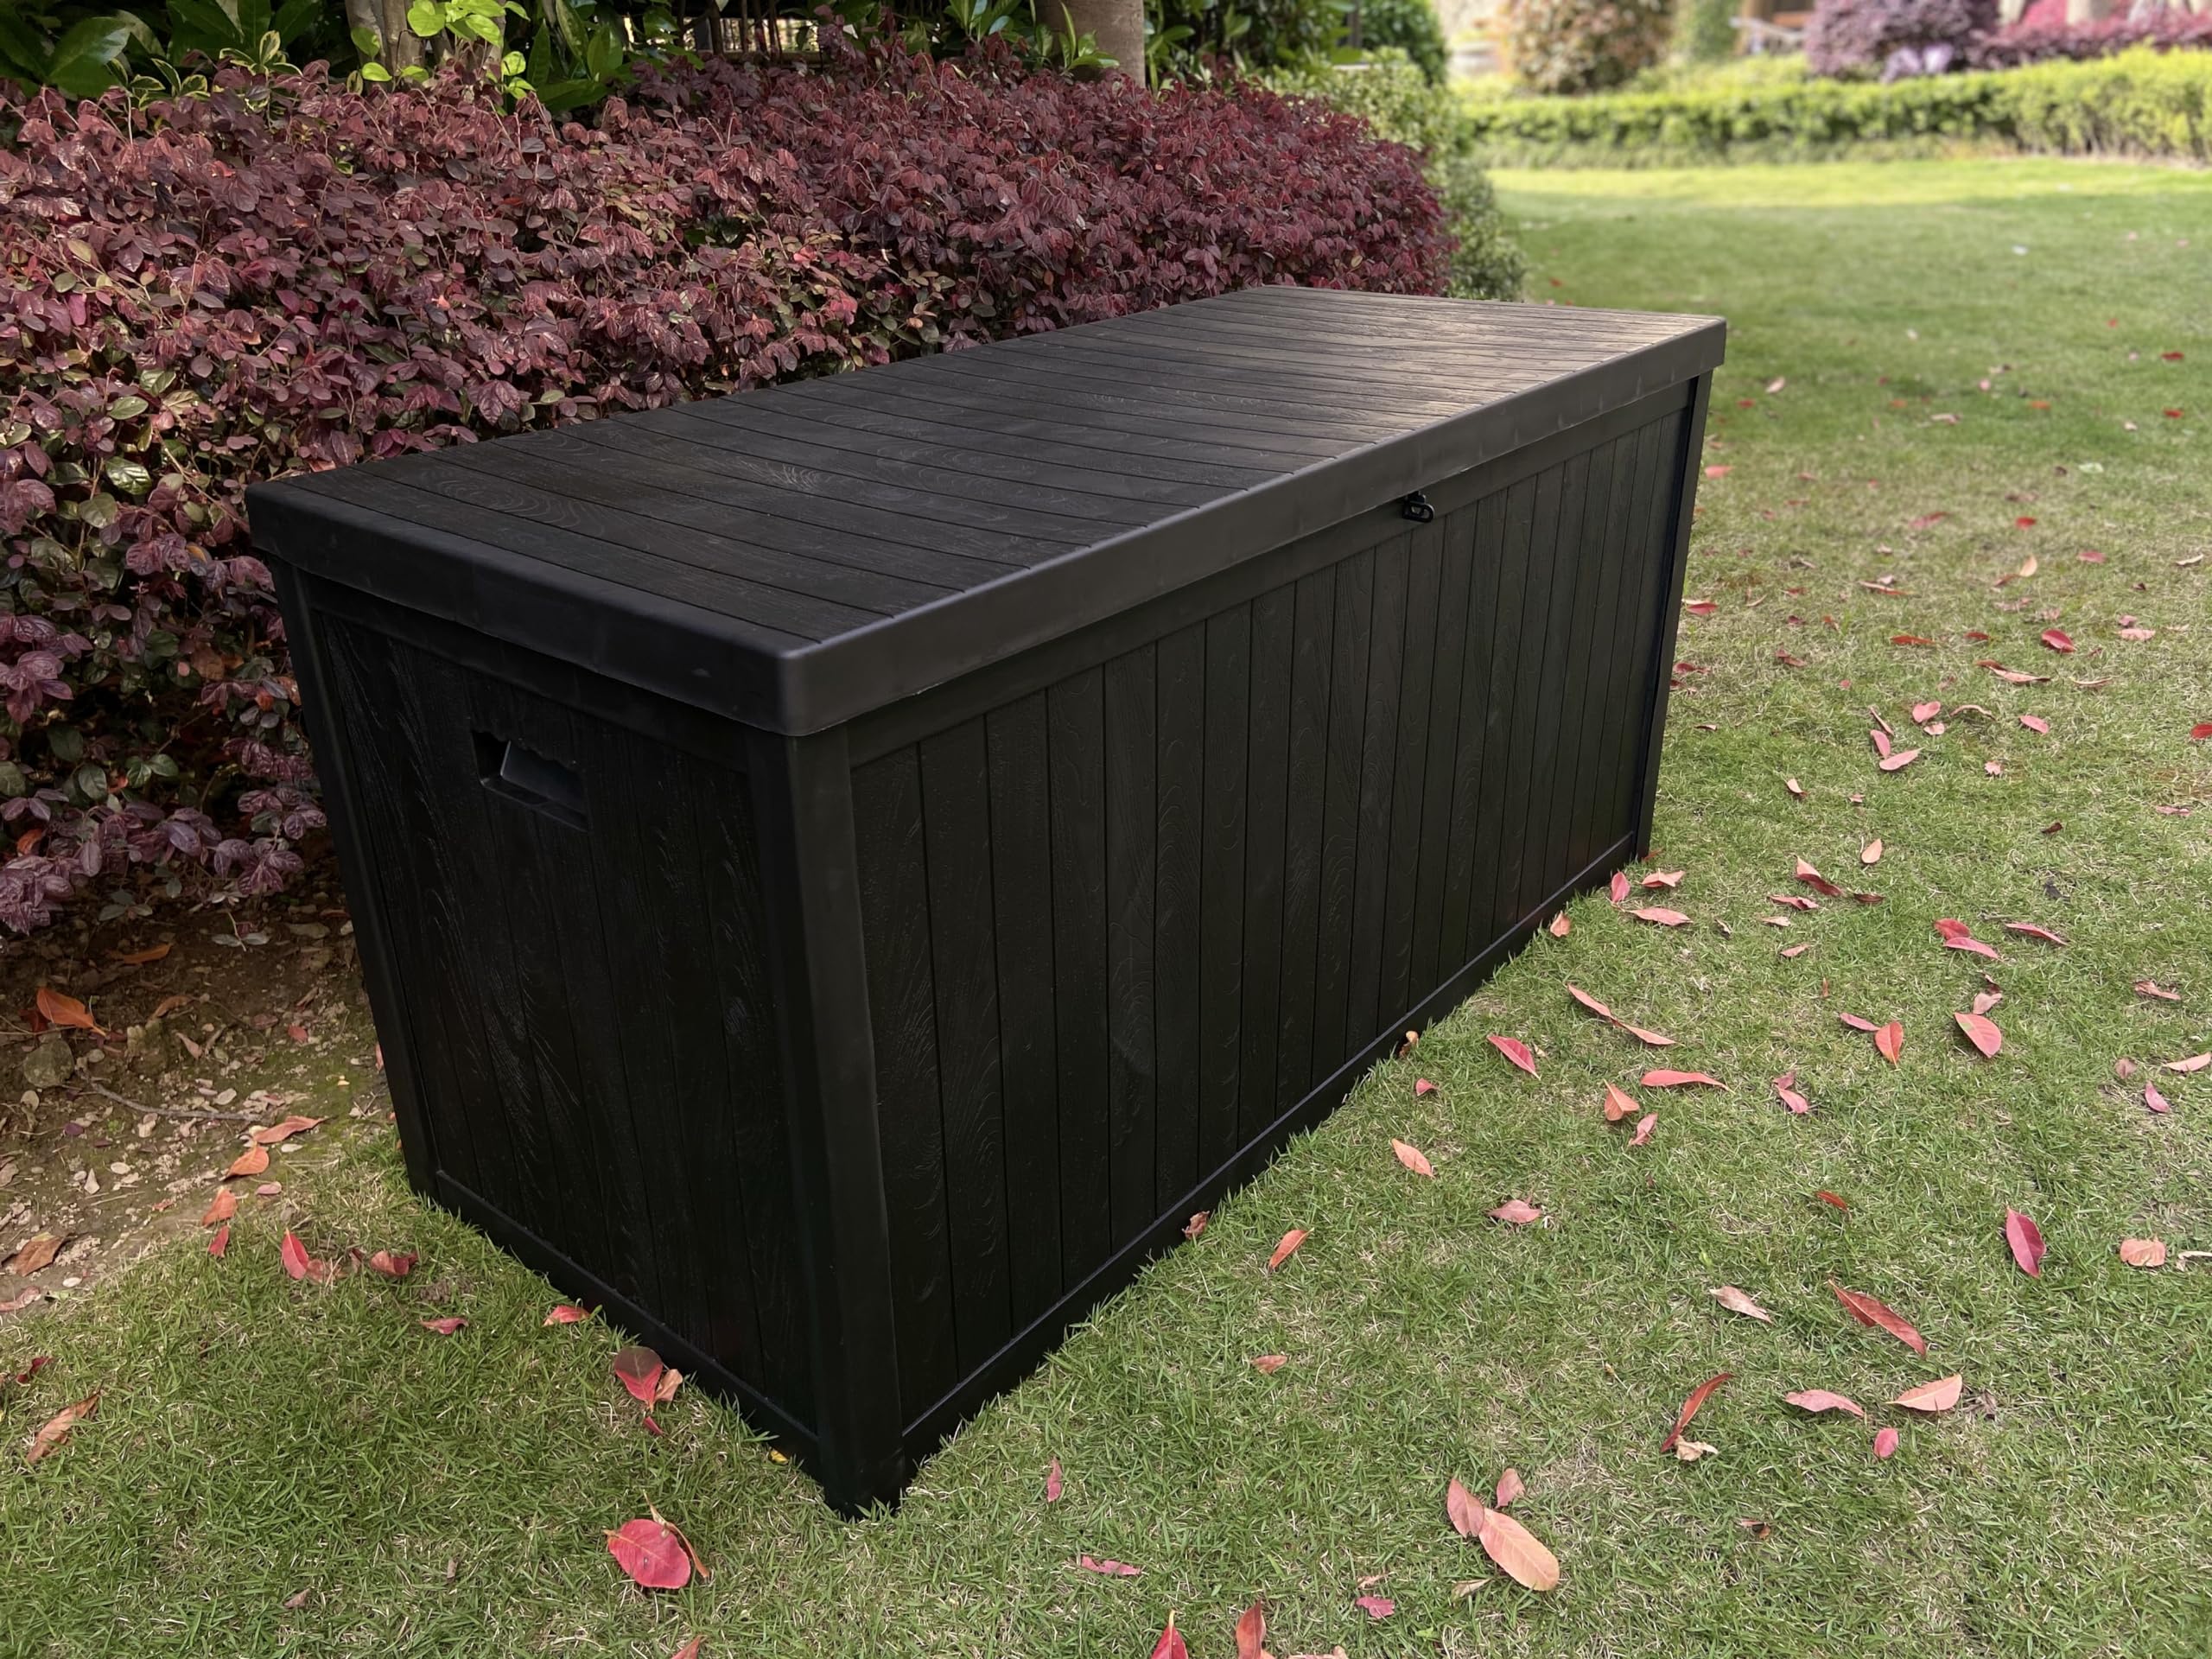 EHHLY Commercial Grade Deck Box, 113 Gallon Outdoor Storage Box Large, Black